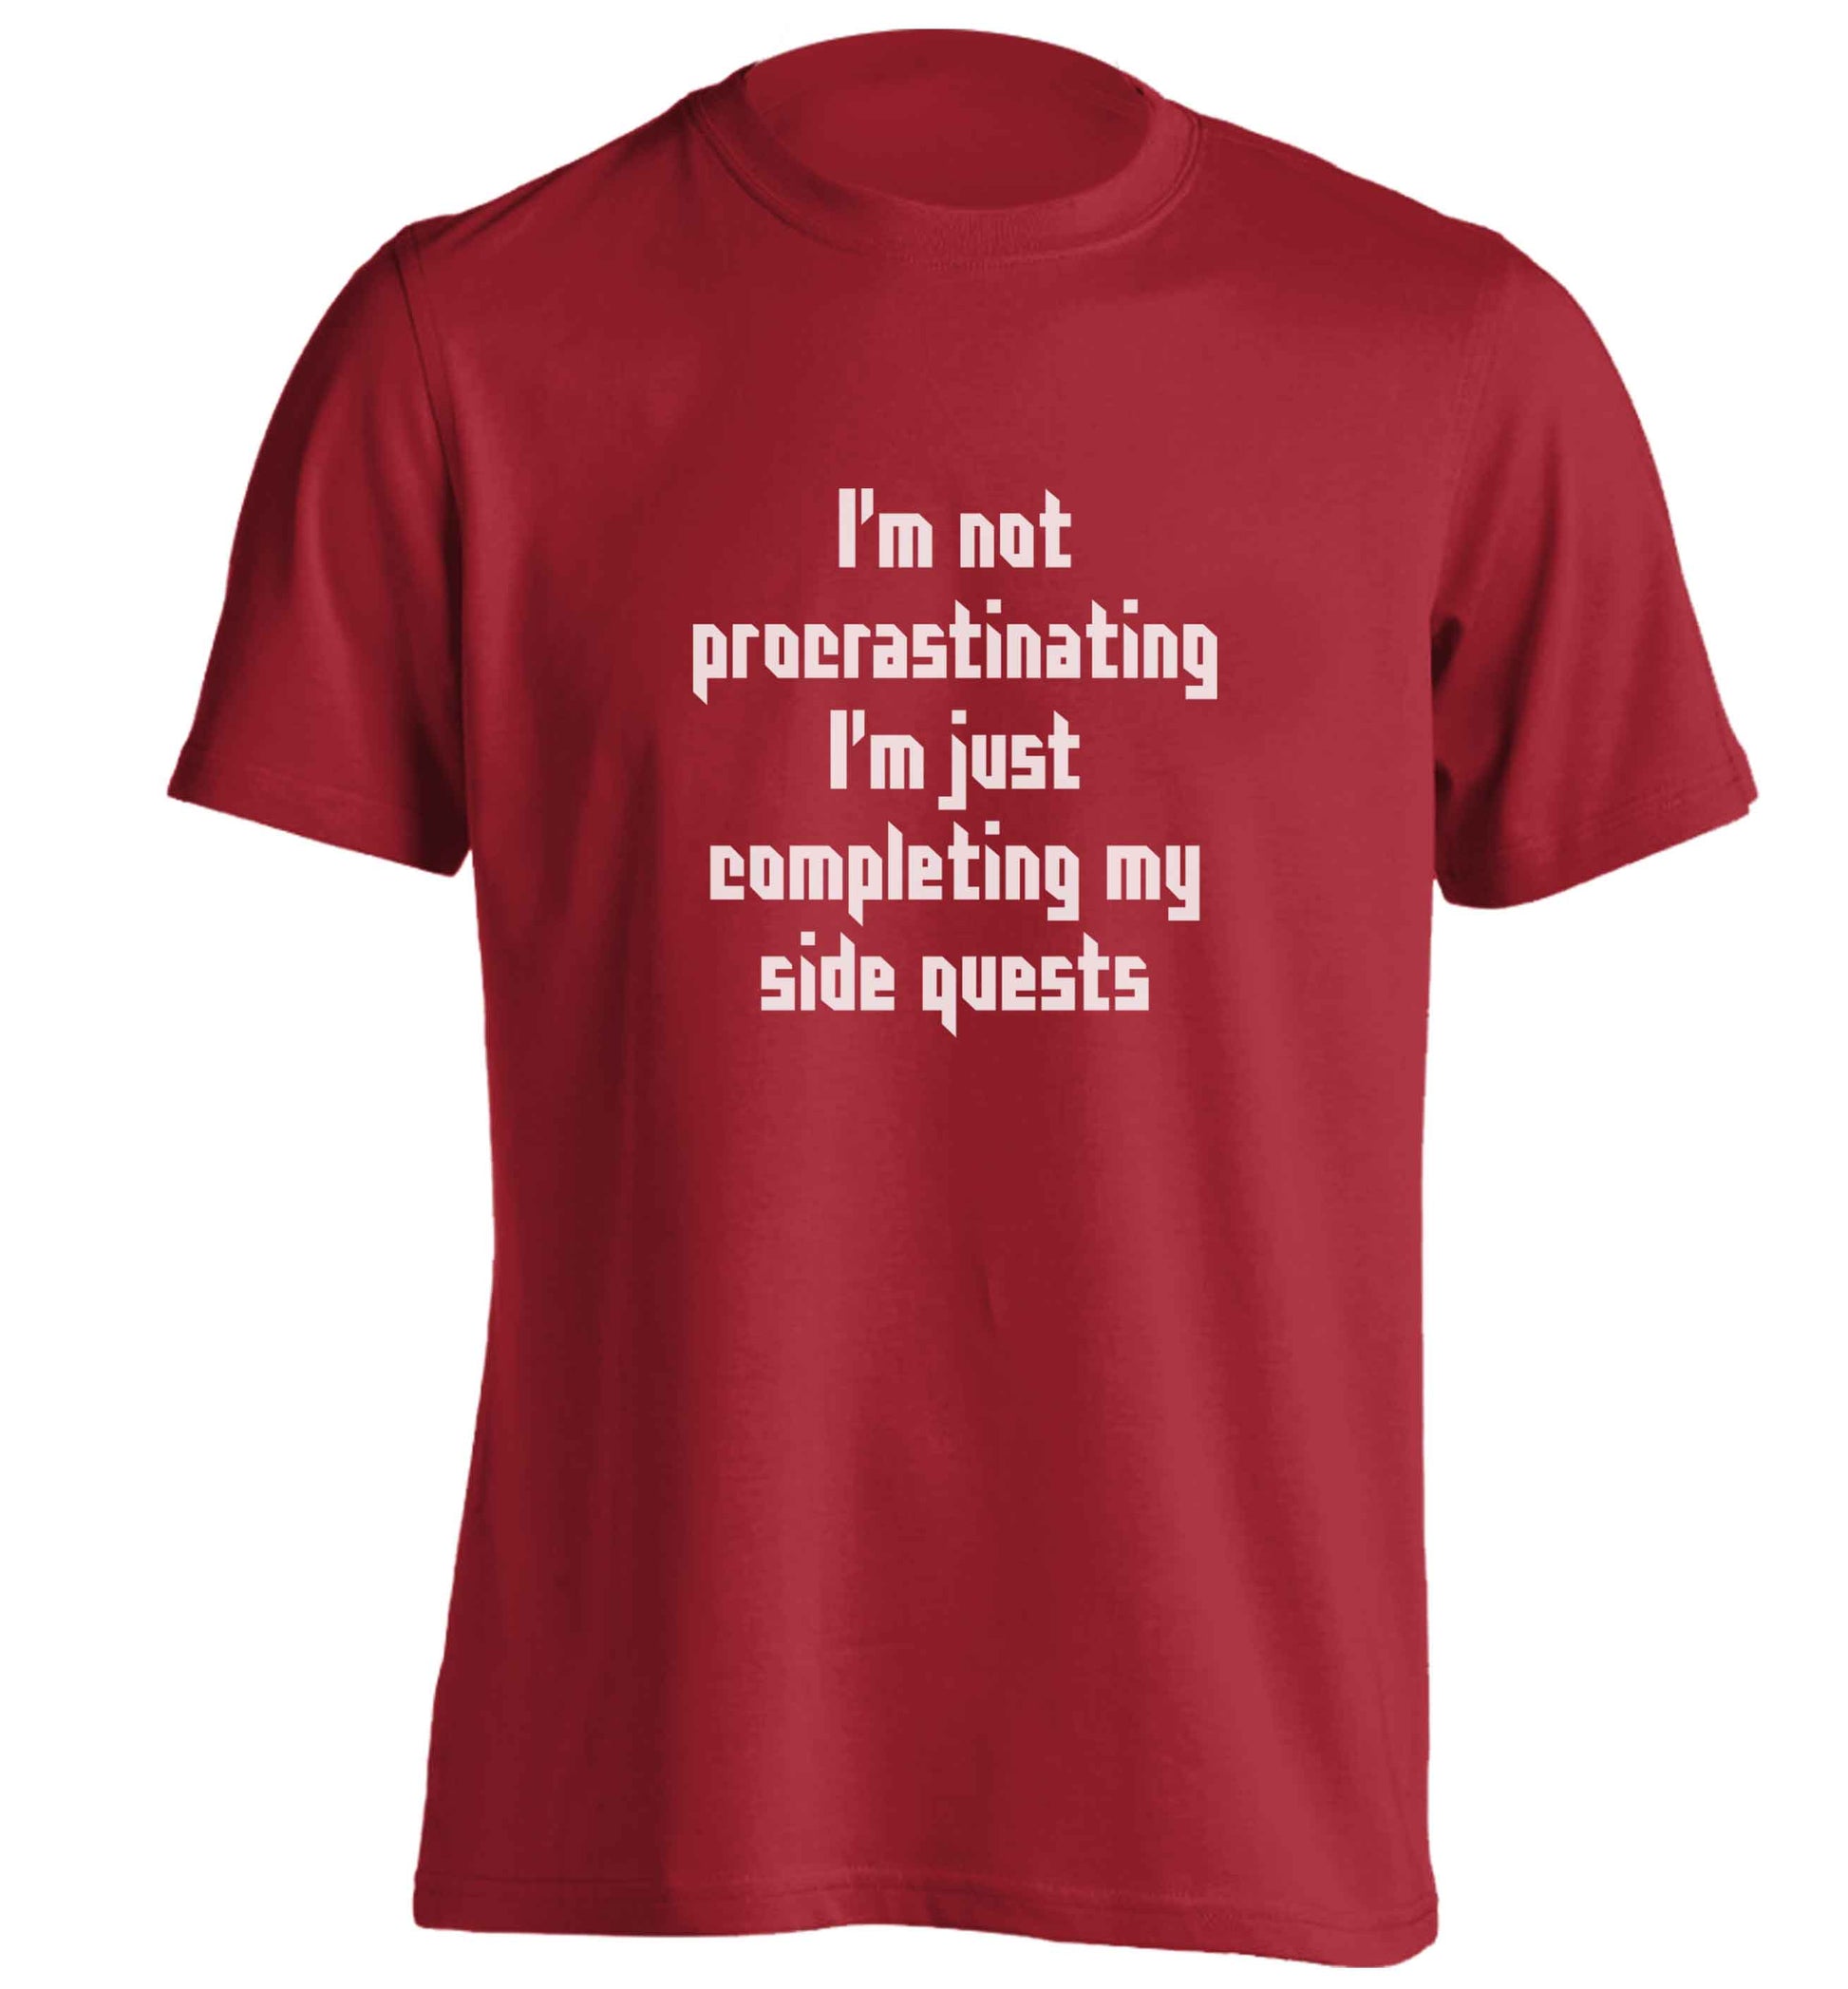 I'm not procrastinating I'm just completing my side quests adults unisex red Tshirt 2XL